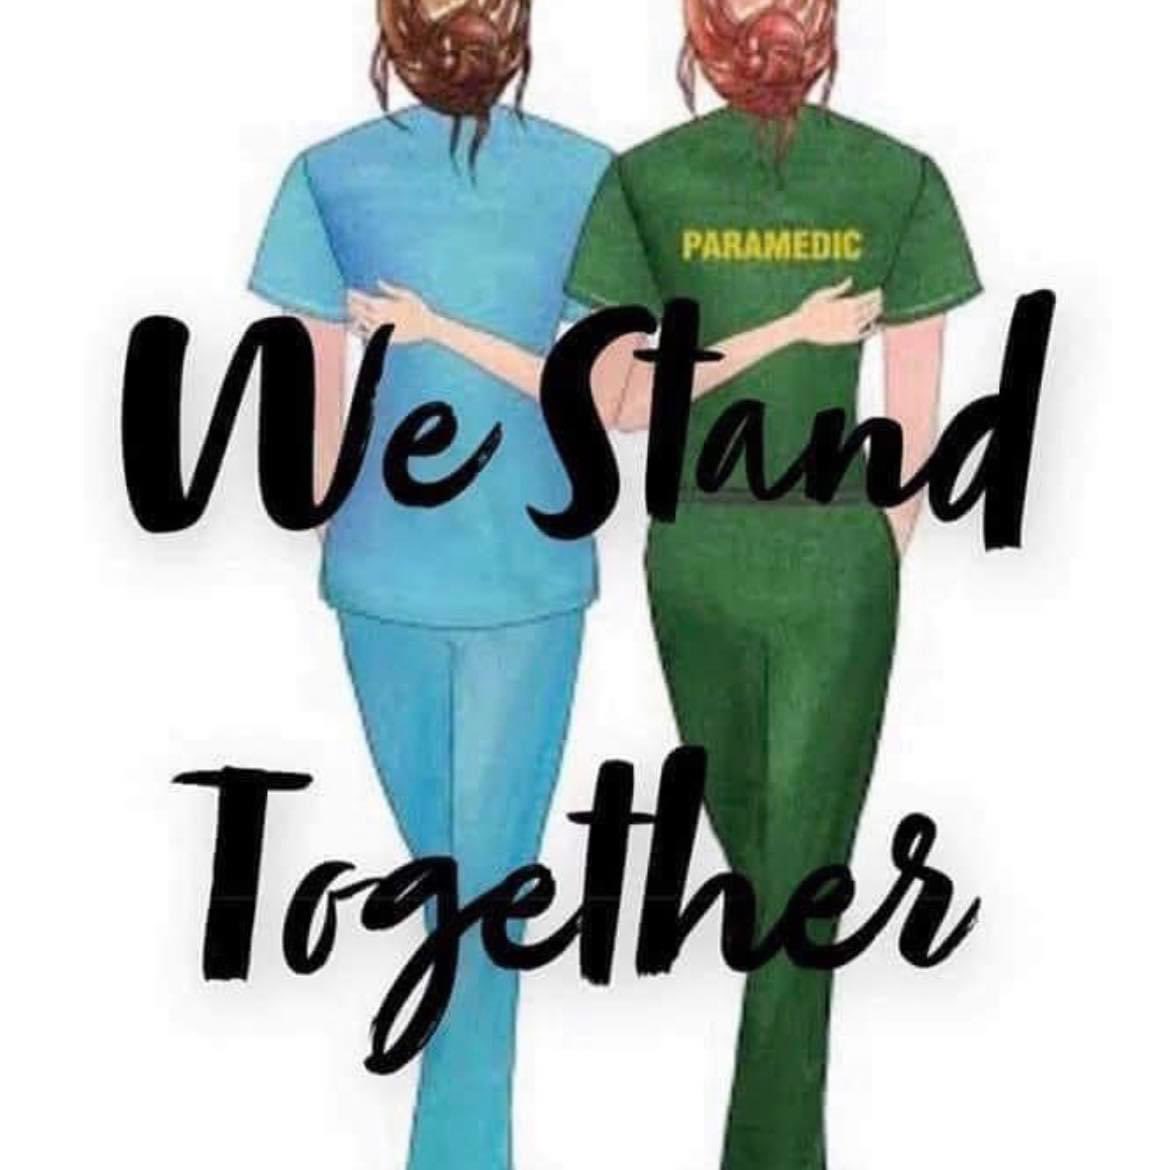 We stand together not just for ourselves but also the public we serve because you deserve better. 
#BetterPay #BetterConditions #BetterPatientCare #BetterPatientTreatment